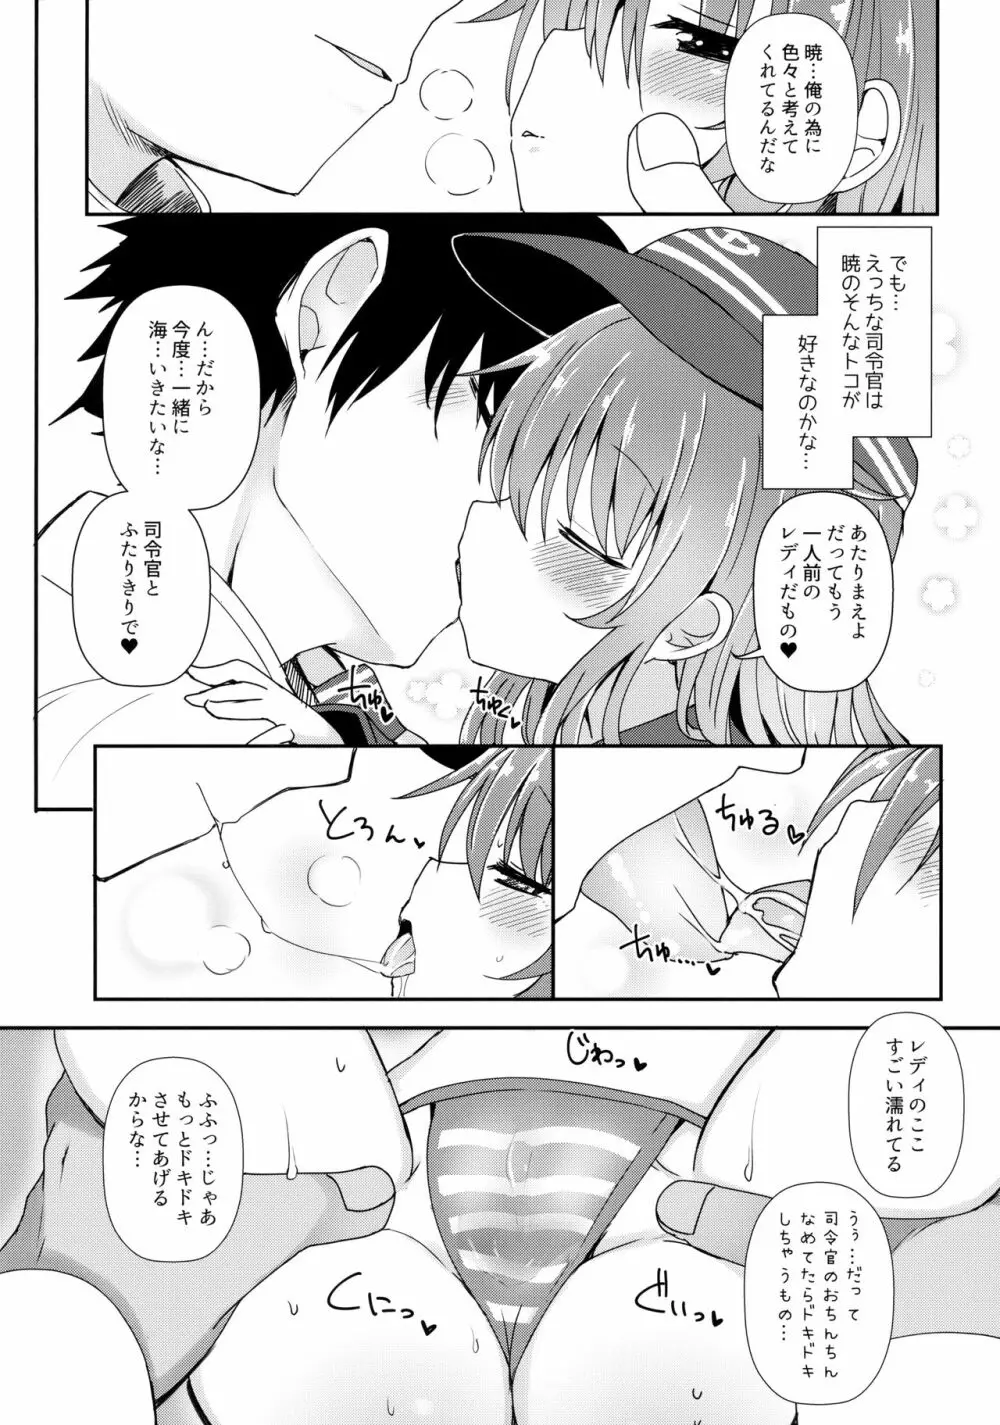 Destroyer SWEET DROPS 暁 - page13